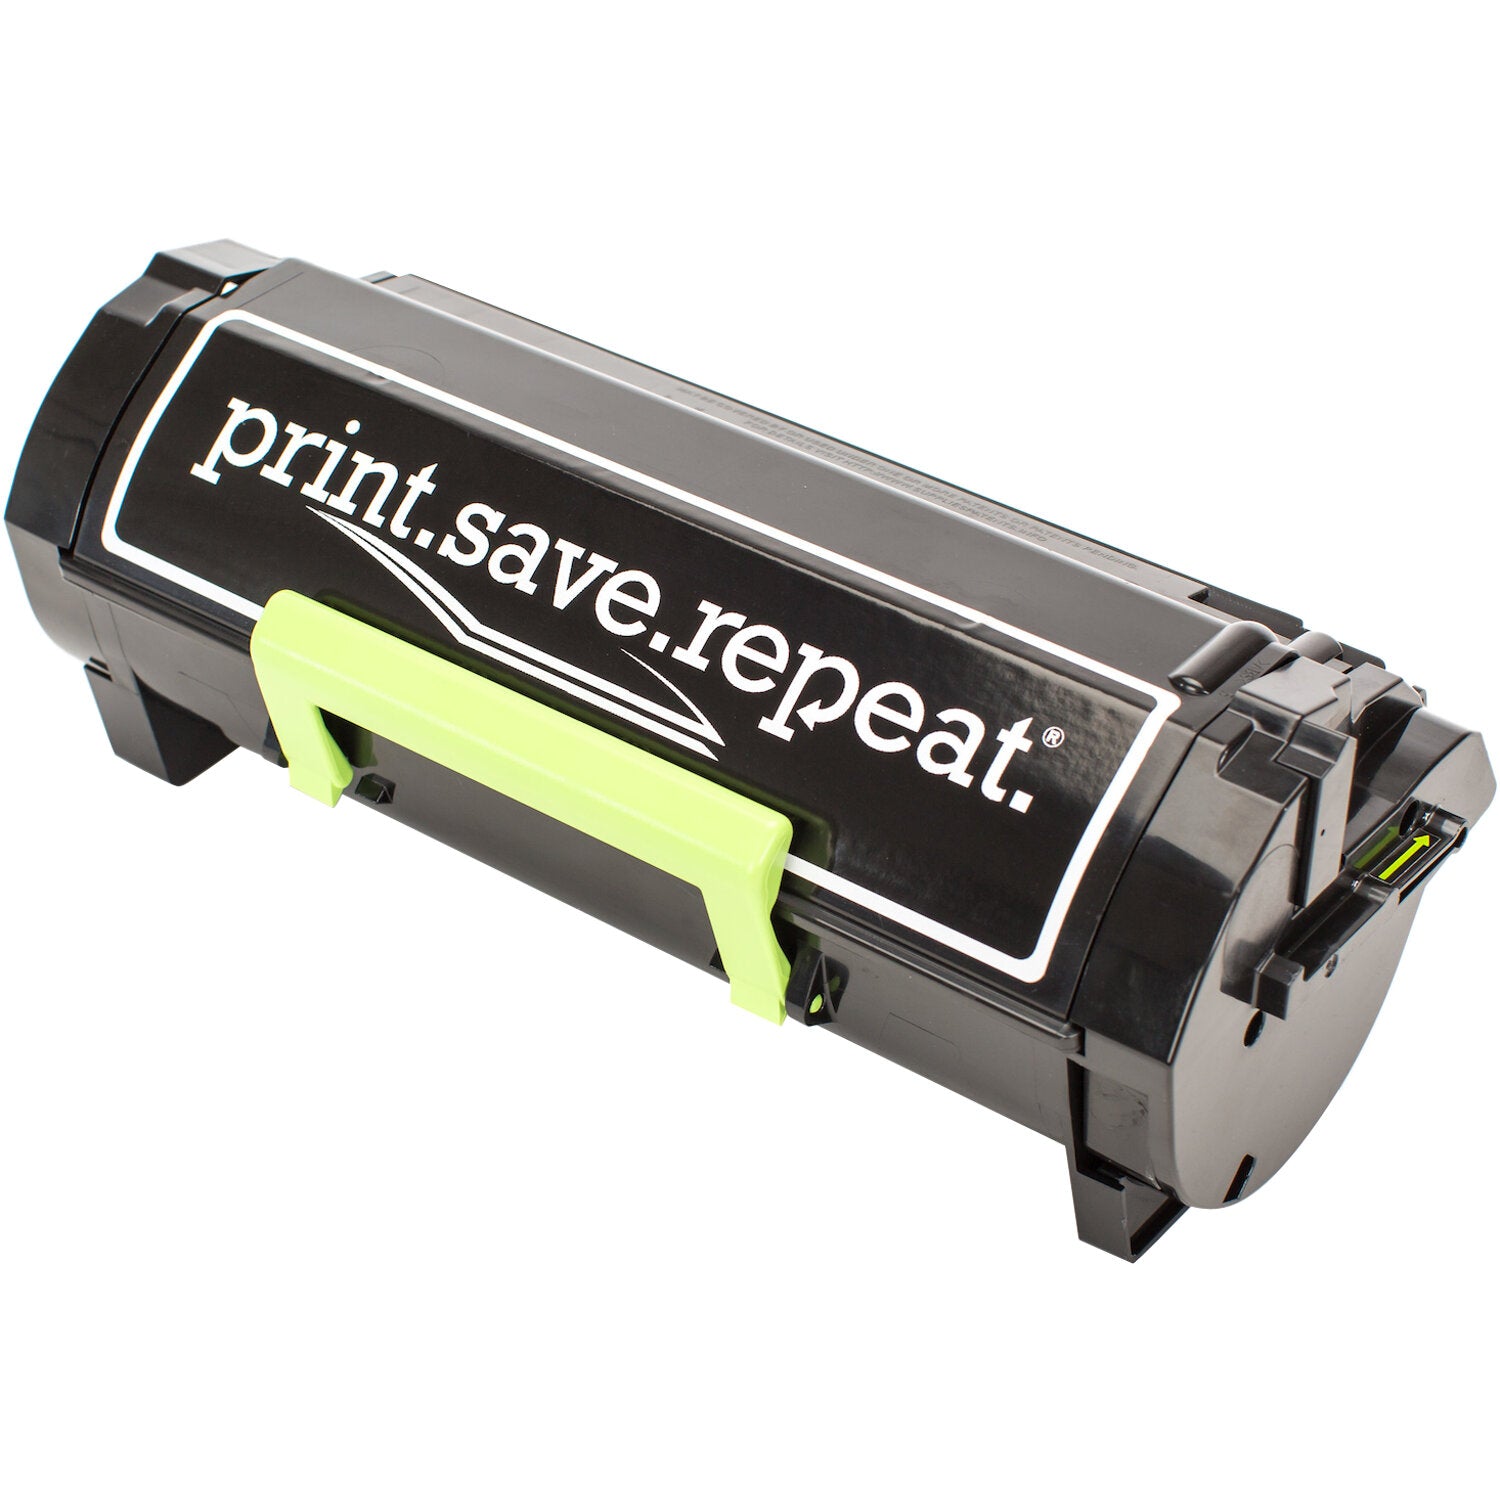 Print.Save.Repeat. Lexmark B251X00 Extra High Yield Remanufactured Toner Cartridge for B2546, B2650, MB2546, MB2650 [10,000 Pages]